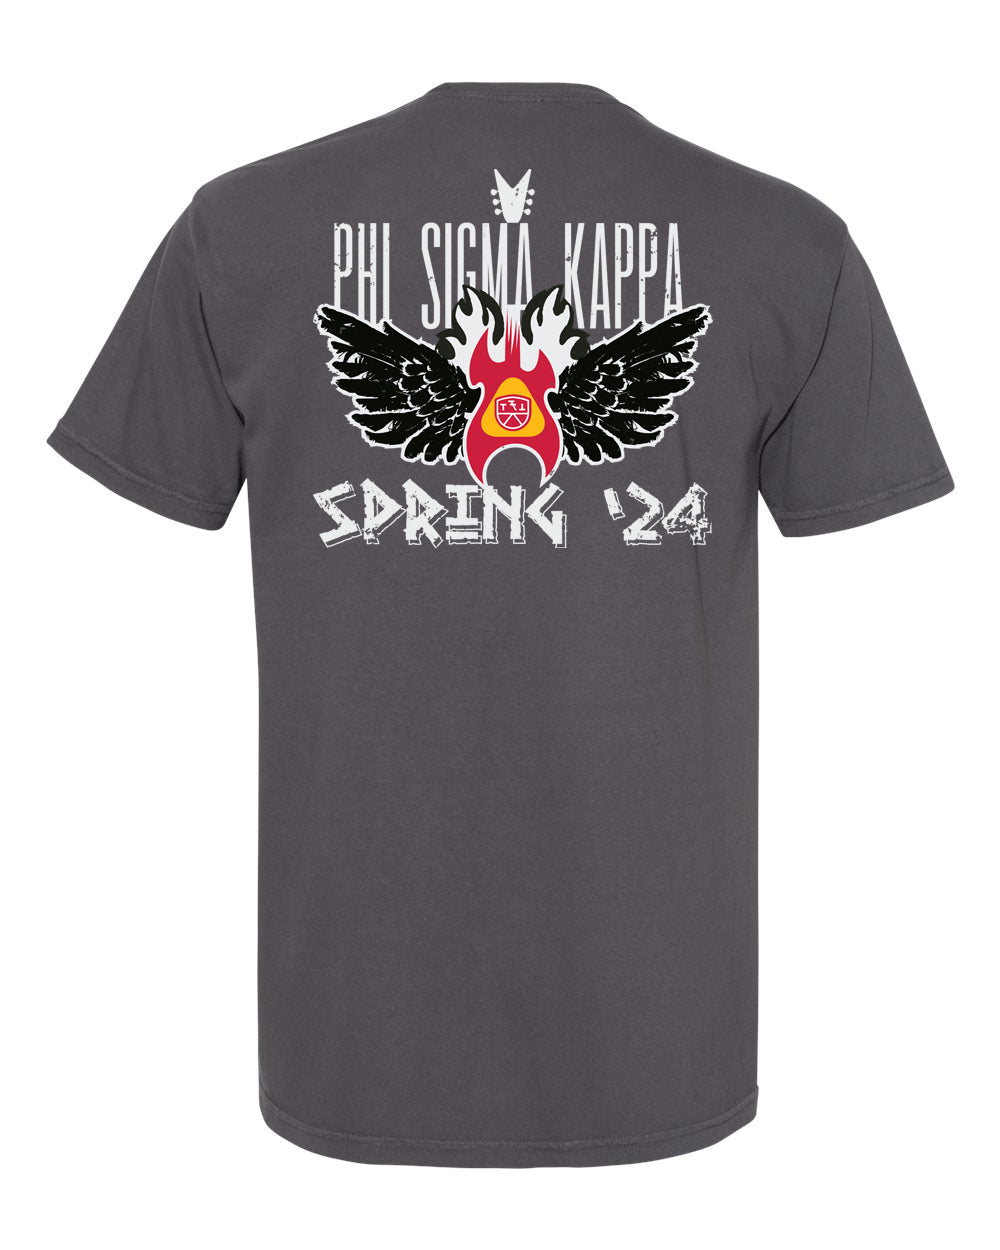 the back of a gray shirt with a red and black eagle on it